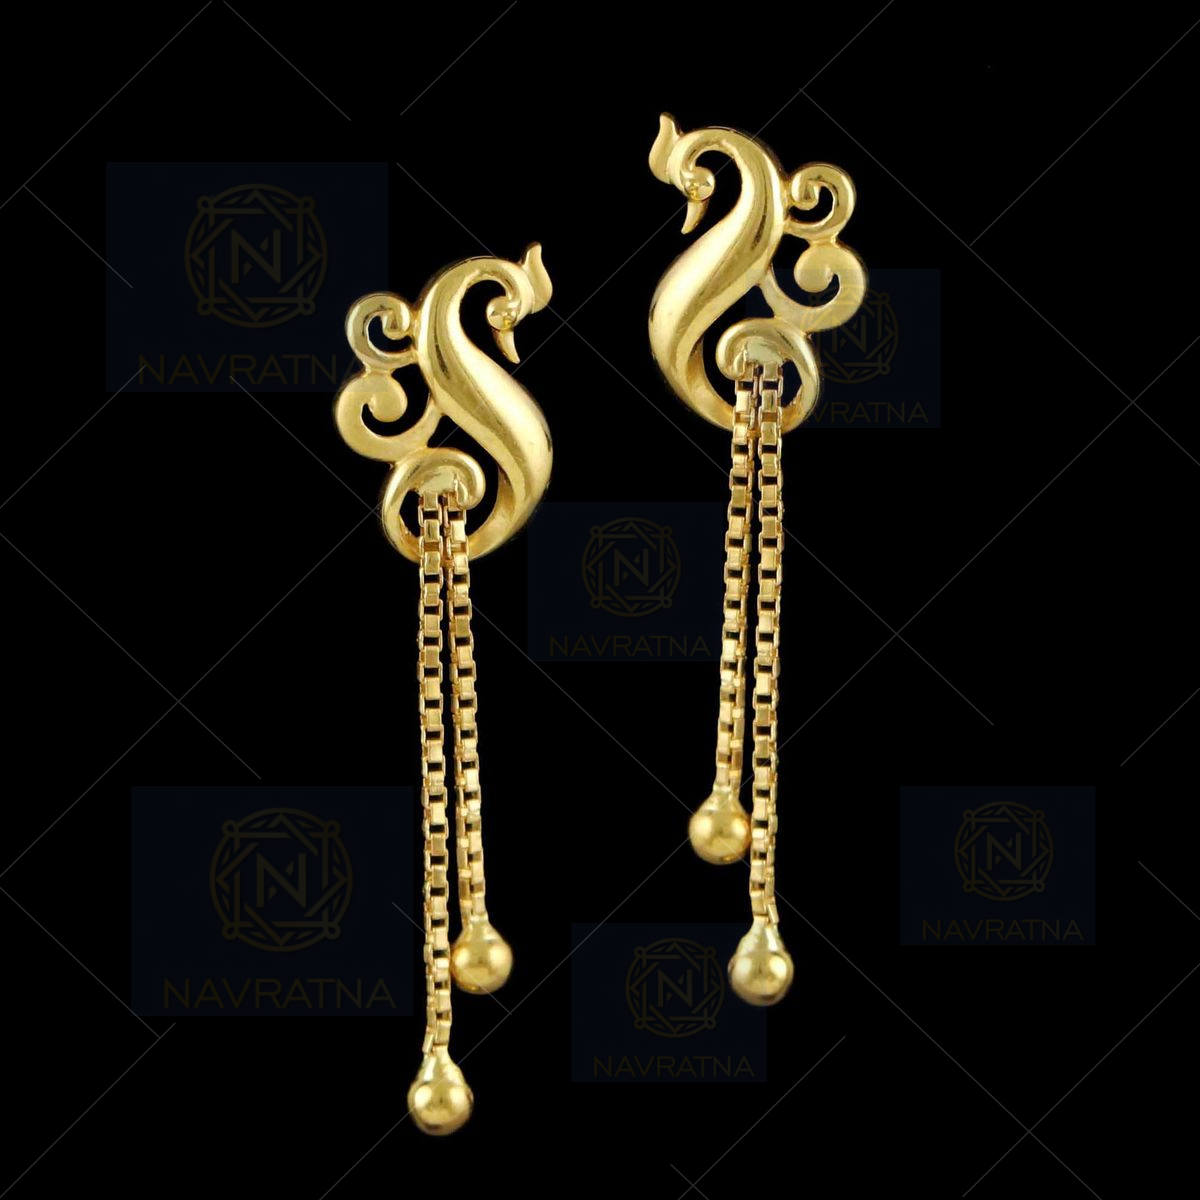 Buy quality 22kt gold cz casting j type stud earrings in Chennai